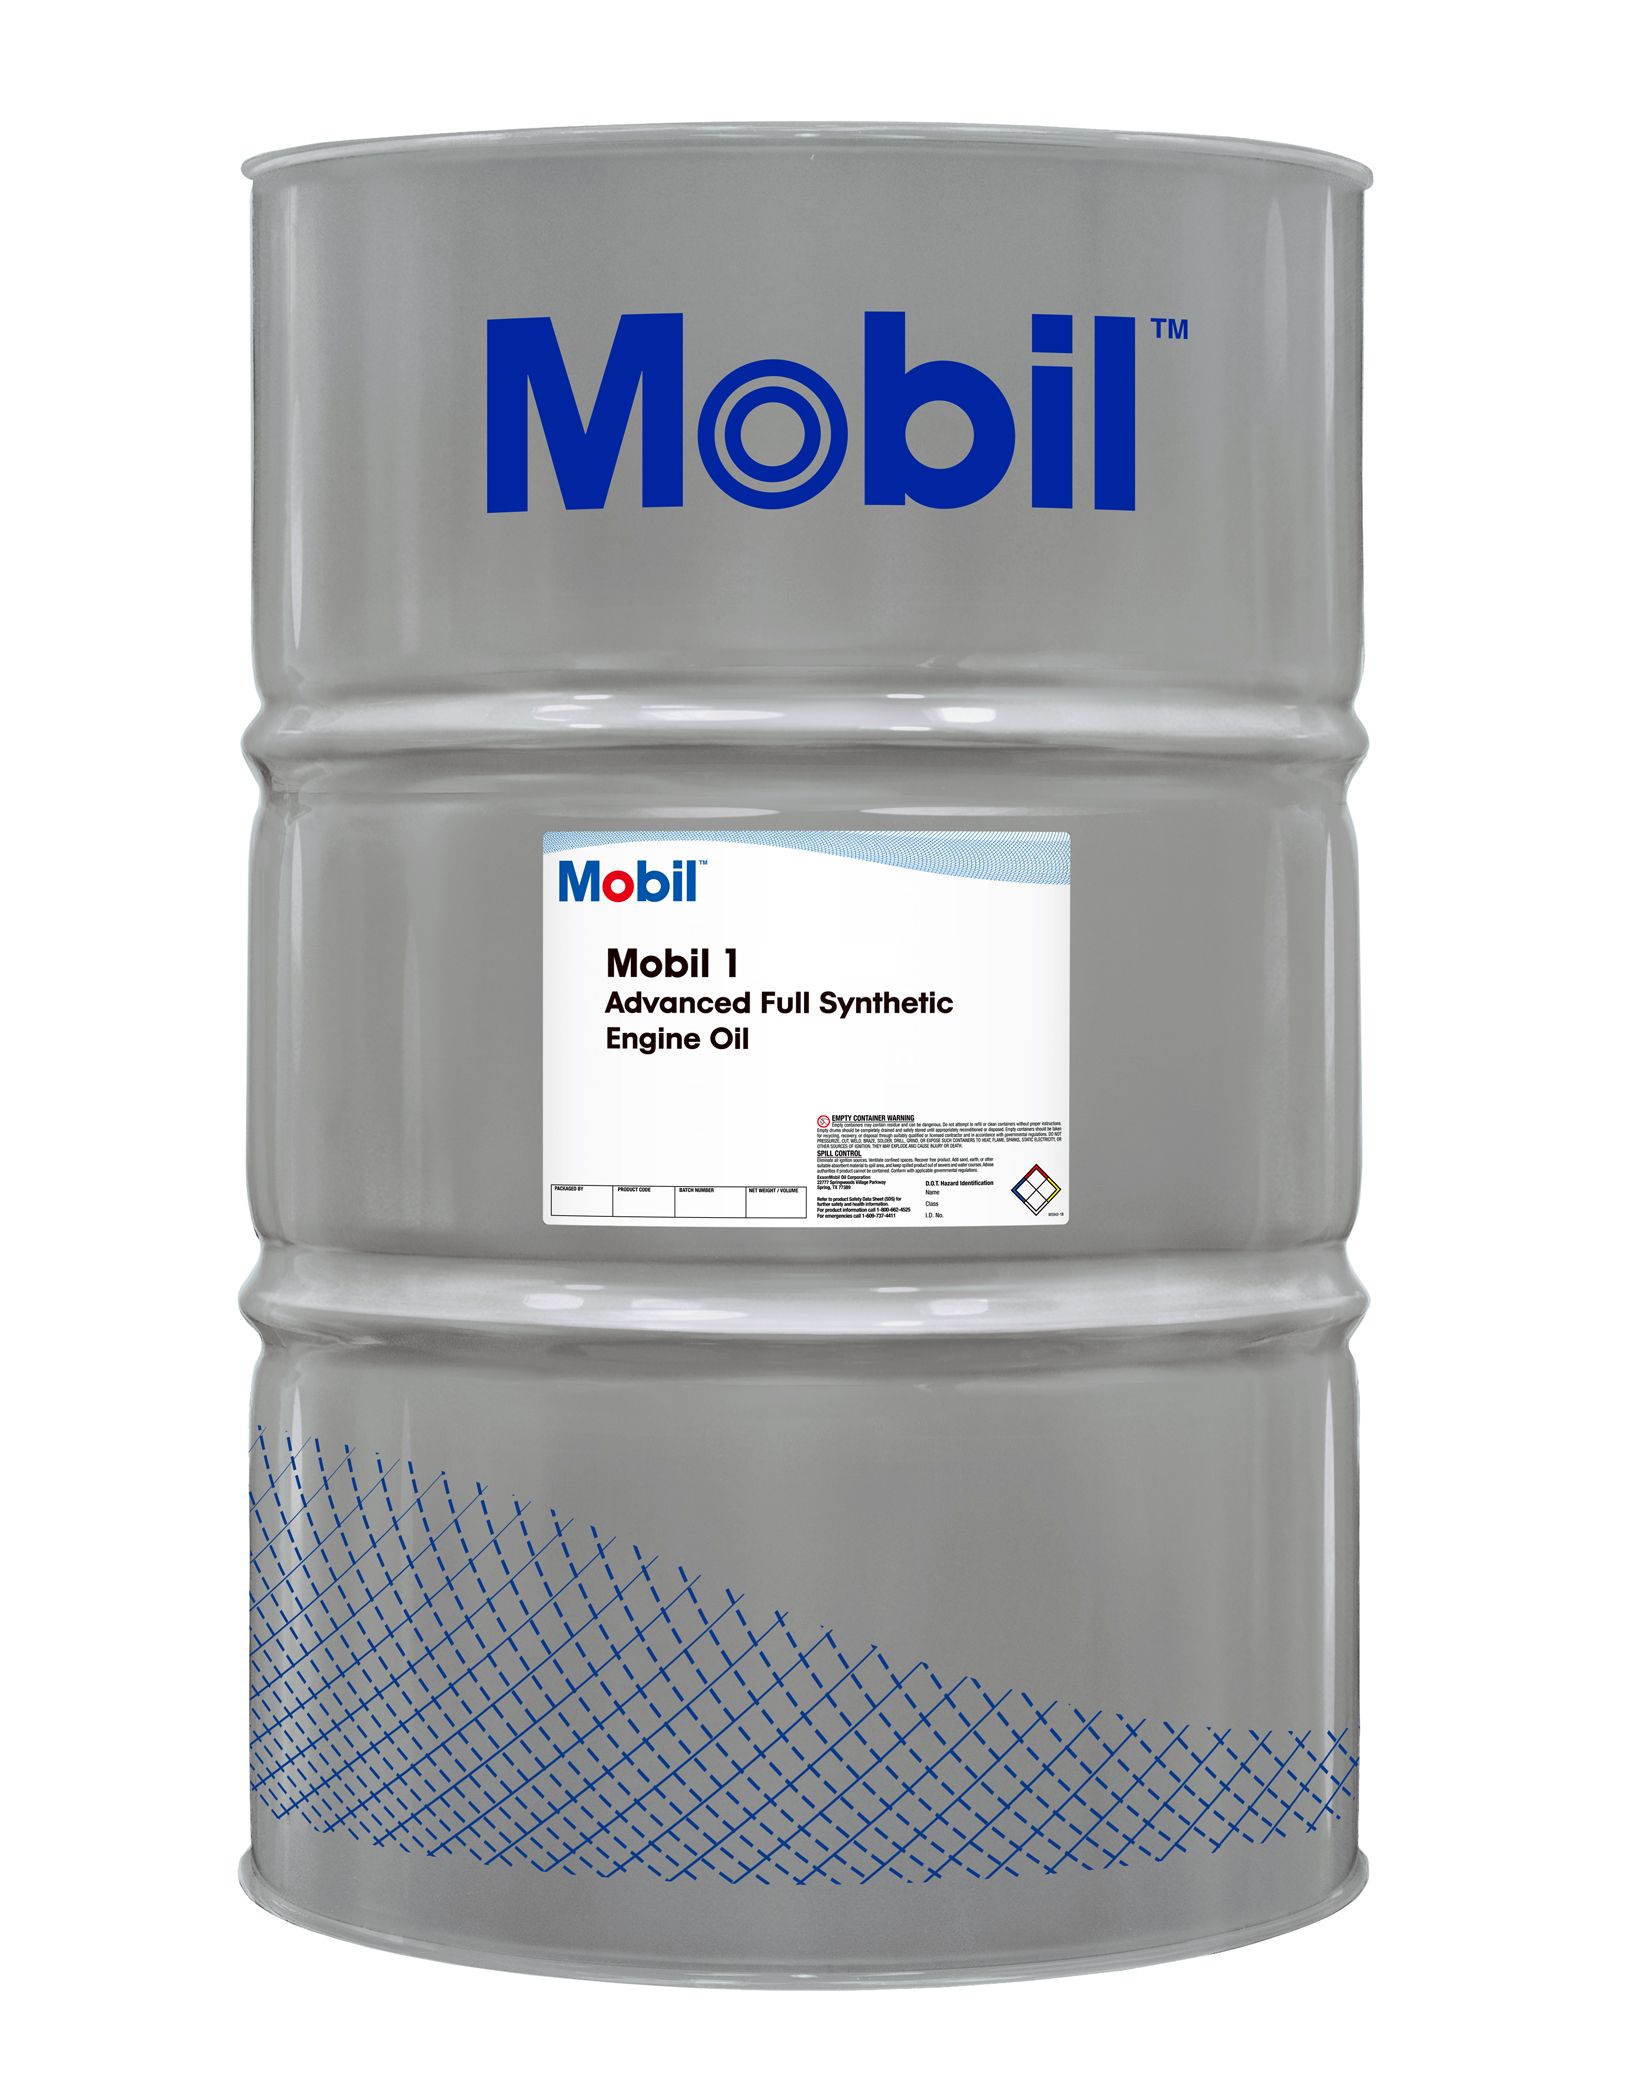 MOBIL EAL ARCTIC 32 100% SYNTHETIC READILY BIODEGRADABLE ISO-32 REFRIGERATION COMPRESSOR OIL FOR SYSTEMS USING OZONE-FRIENDLY HFC REFRIGERANTS, 55 Gallon Drum